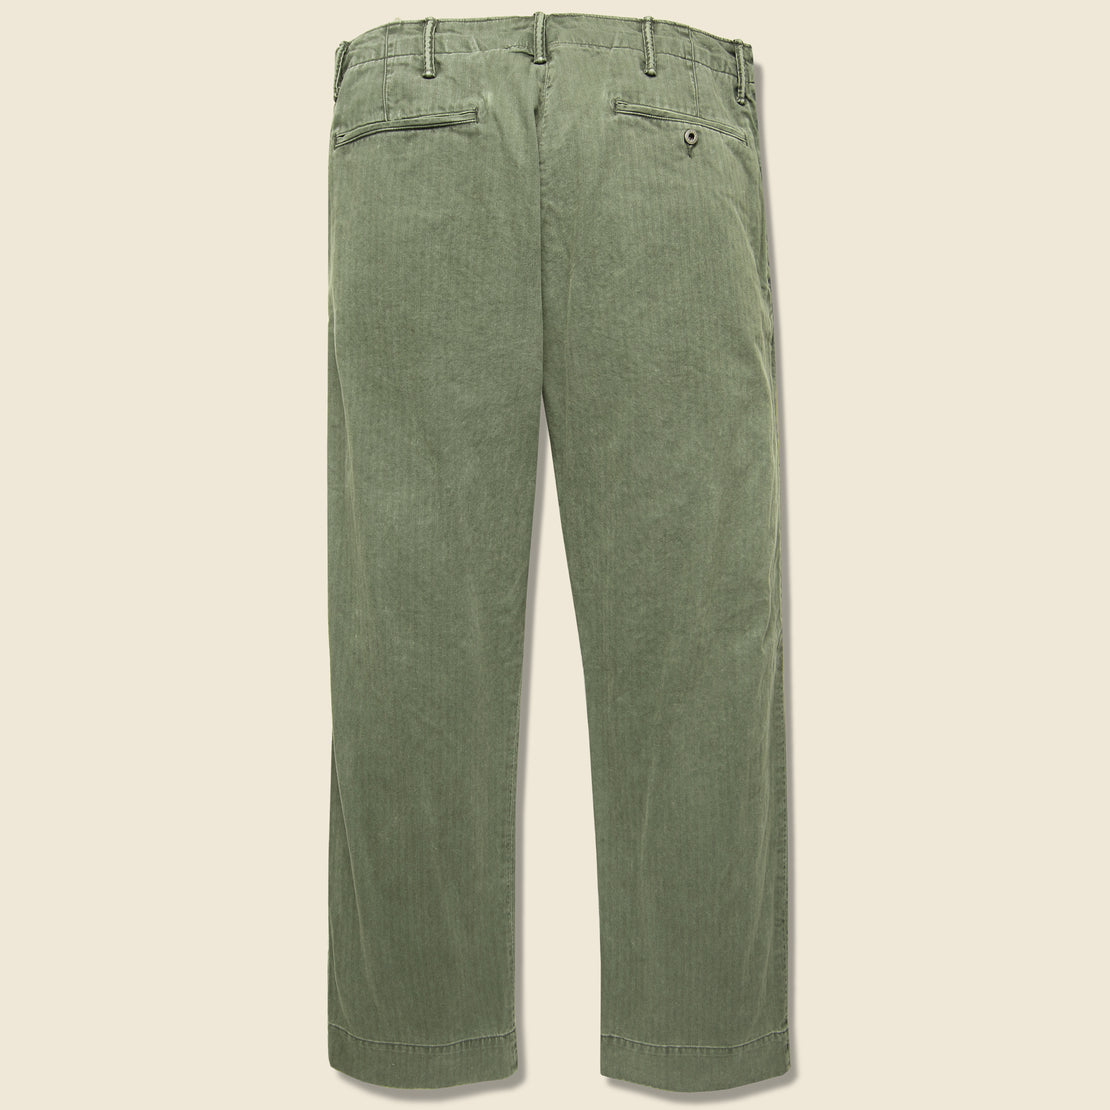 Cotton Field Chino - Dark Olive - RRL - STAG Provisions - Pants - Twill